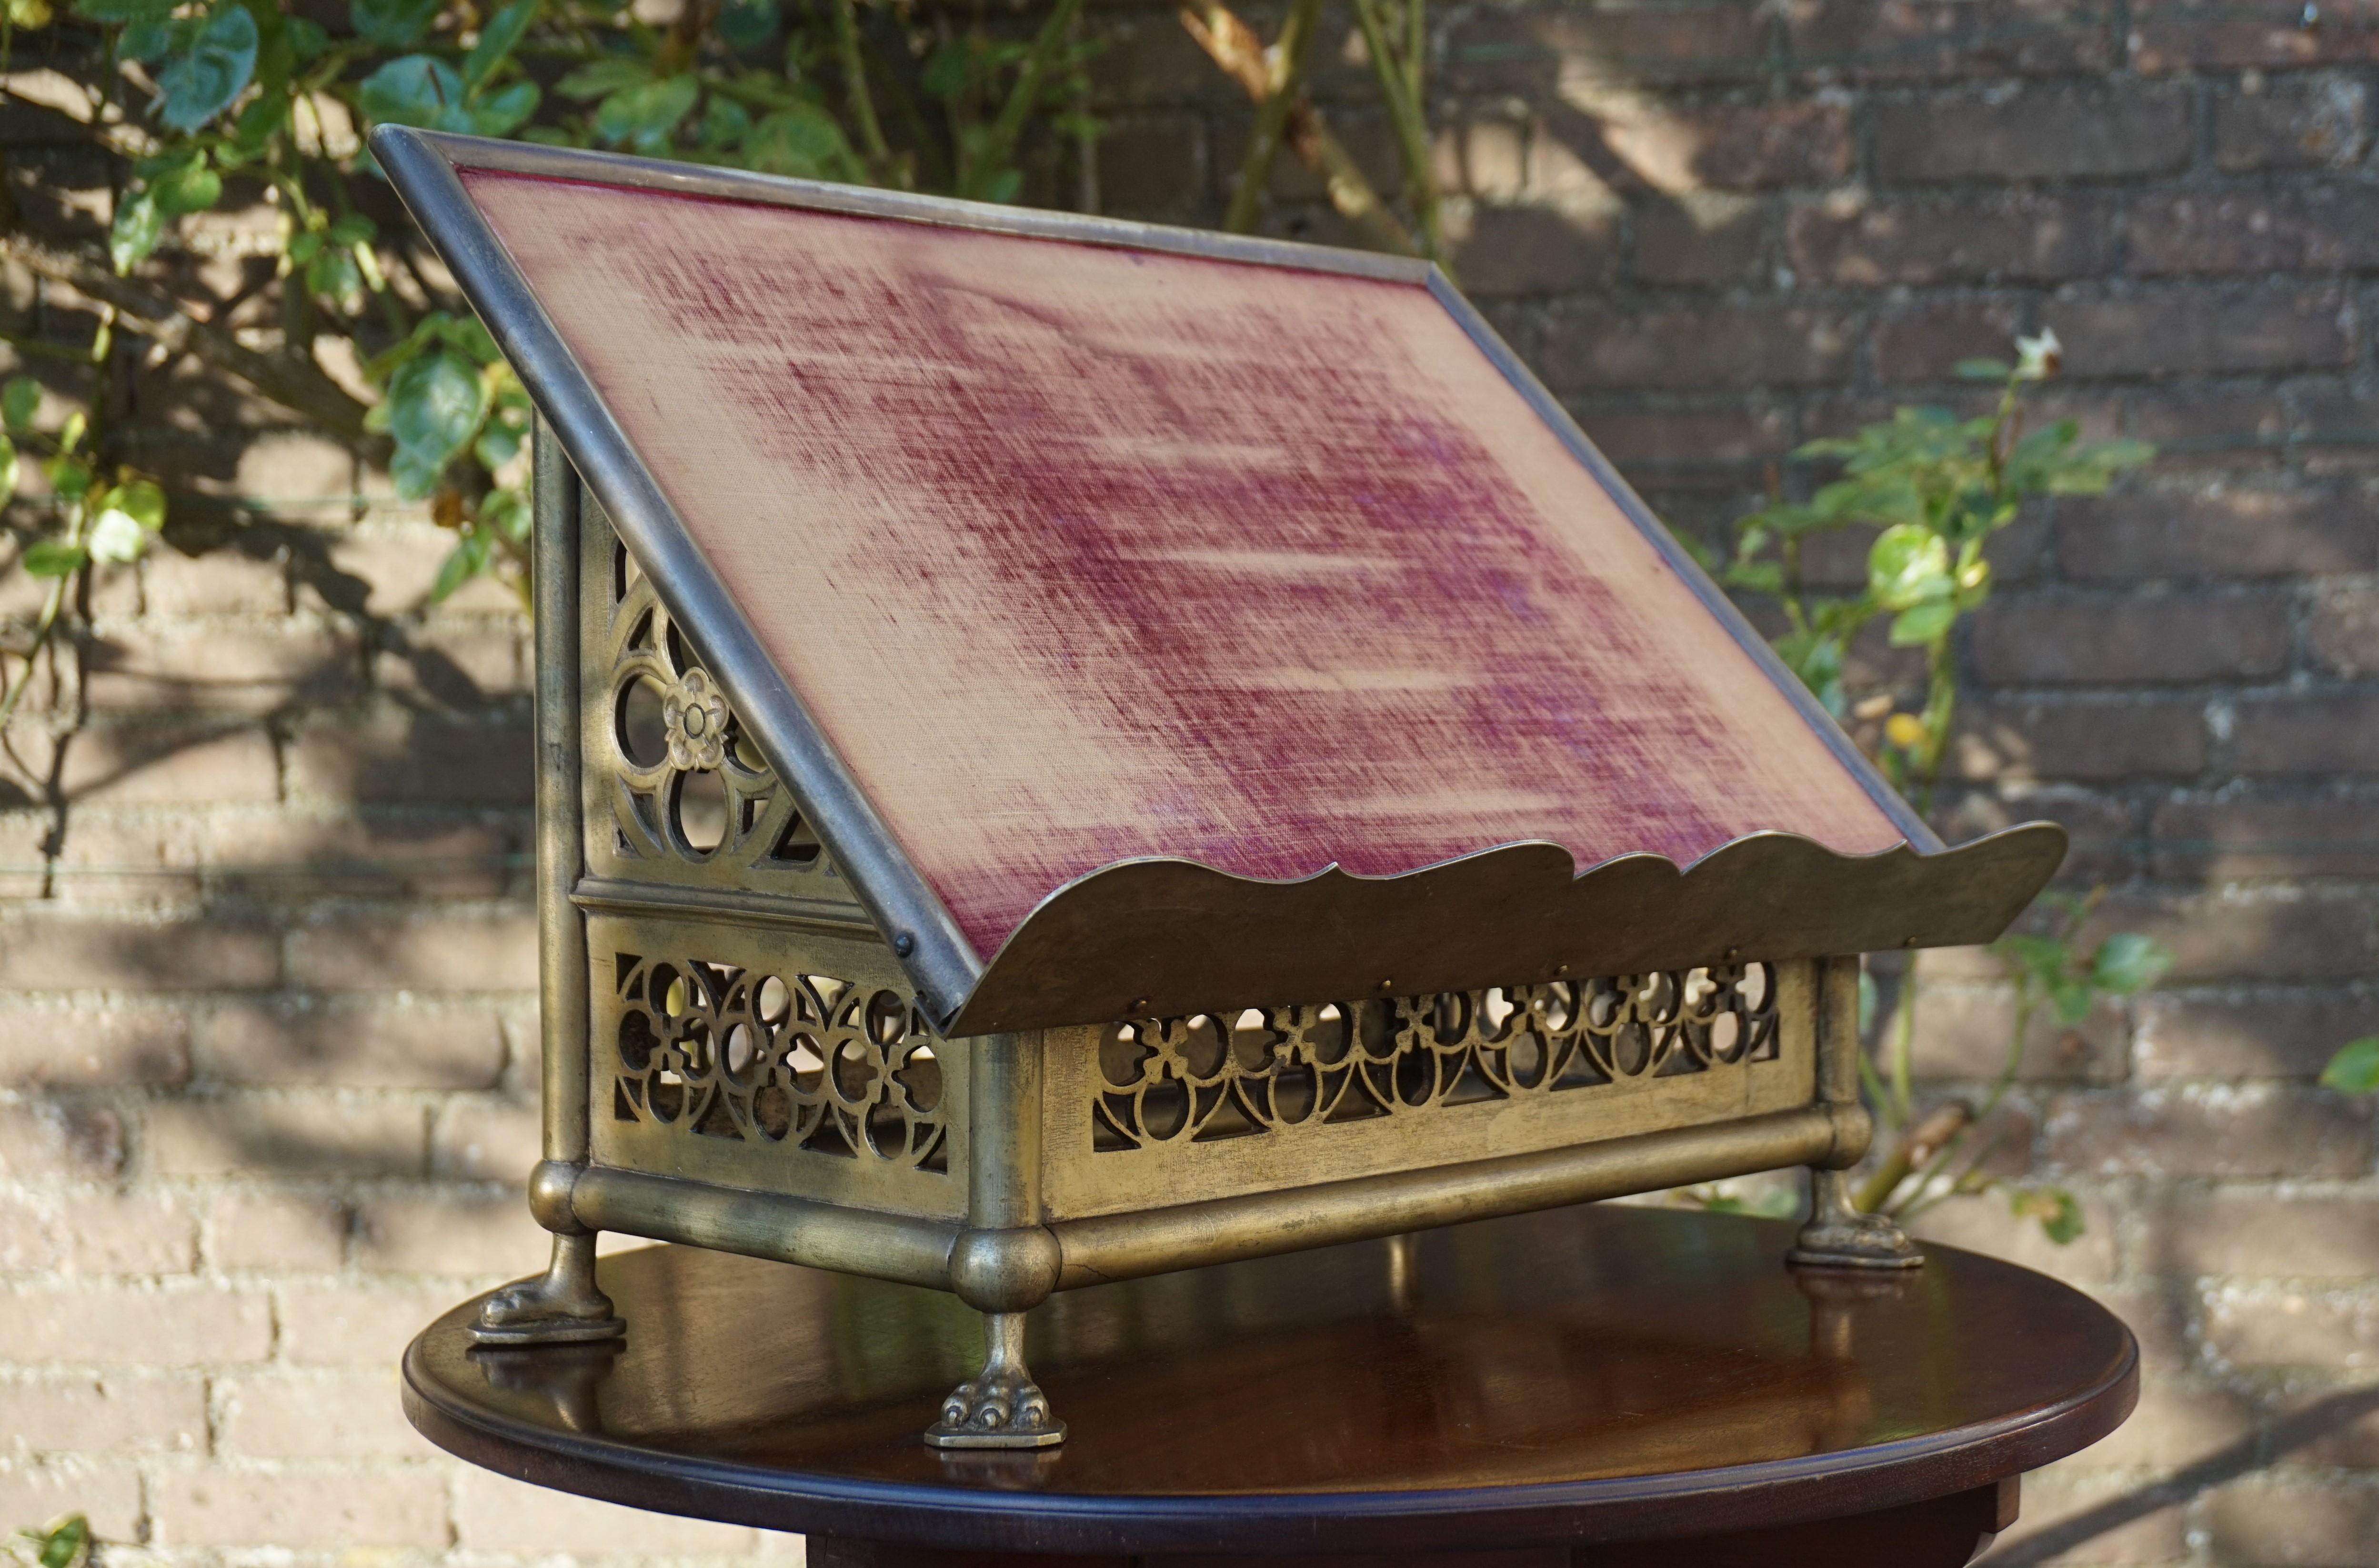 A marvellous and strong quality antique for placing your bible on.

Over the years we have sold many ecclesiastical antiques, but you hardly ever find them as original as this bronze, Gothic Revival bible stand from the late 1800s. The handcrafted